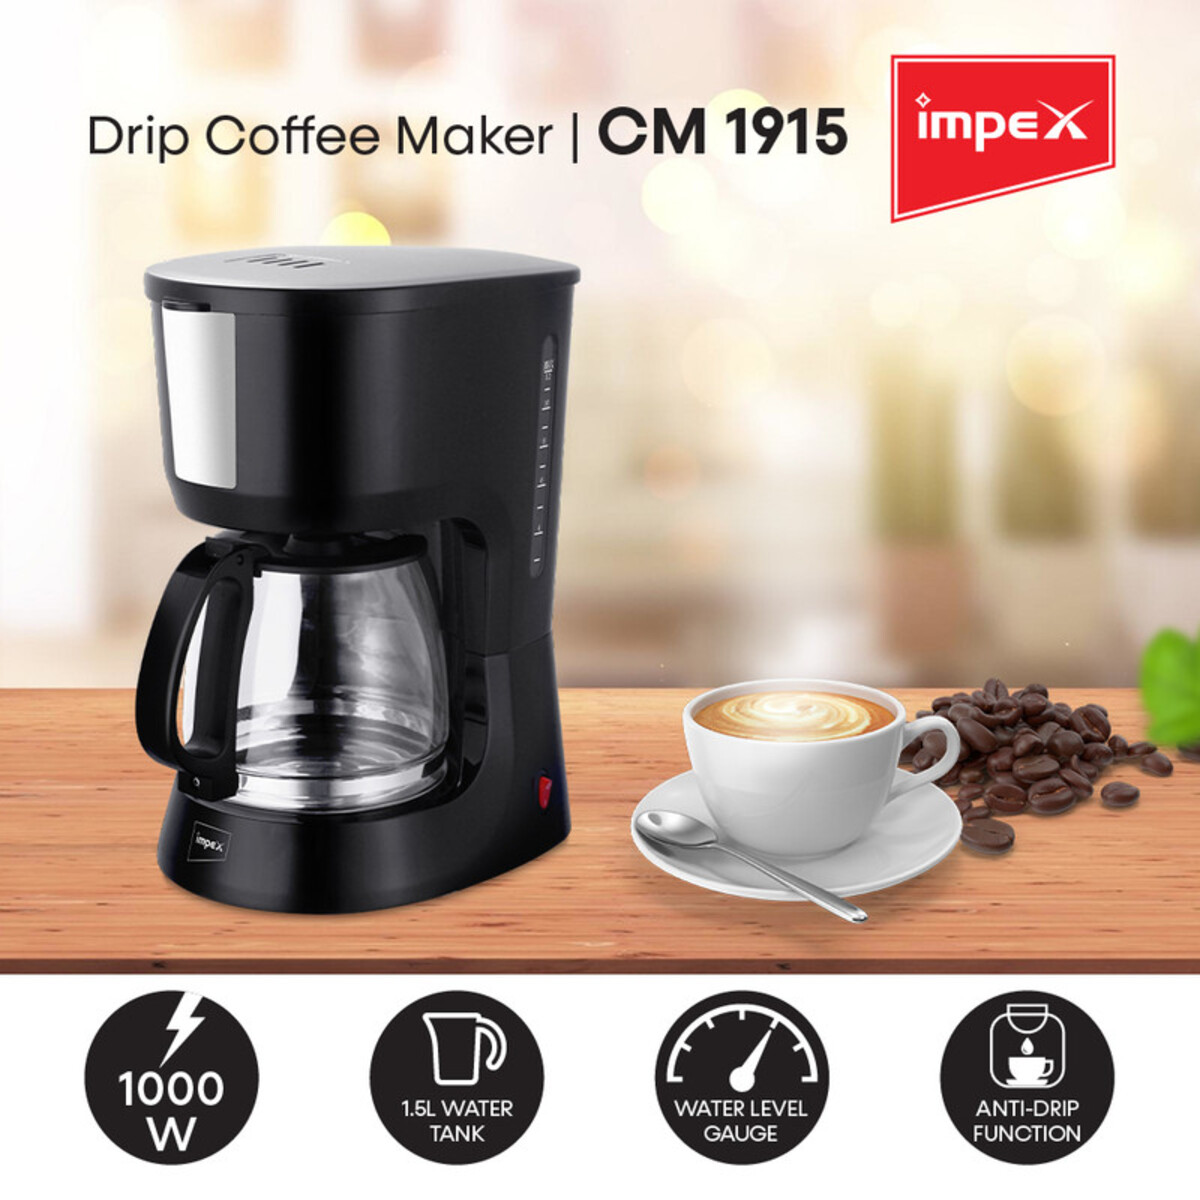 Impex CM 1915 1000 Watts Drip Coffee Maker featuring Anti-Drip Function